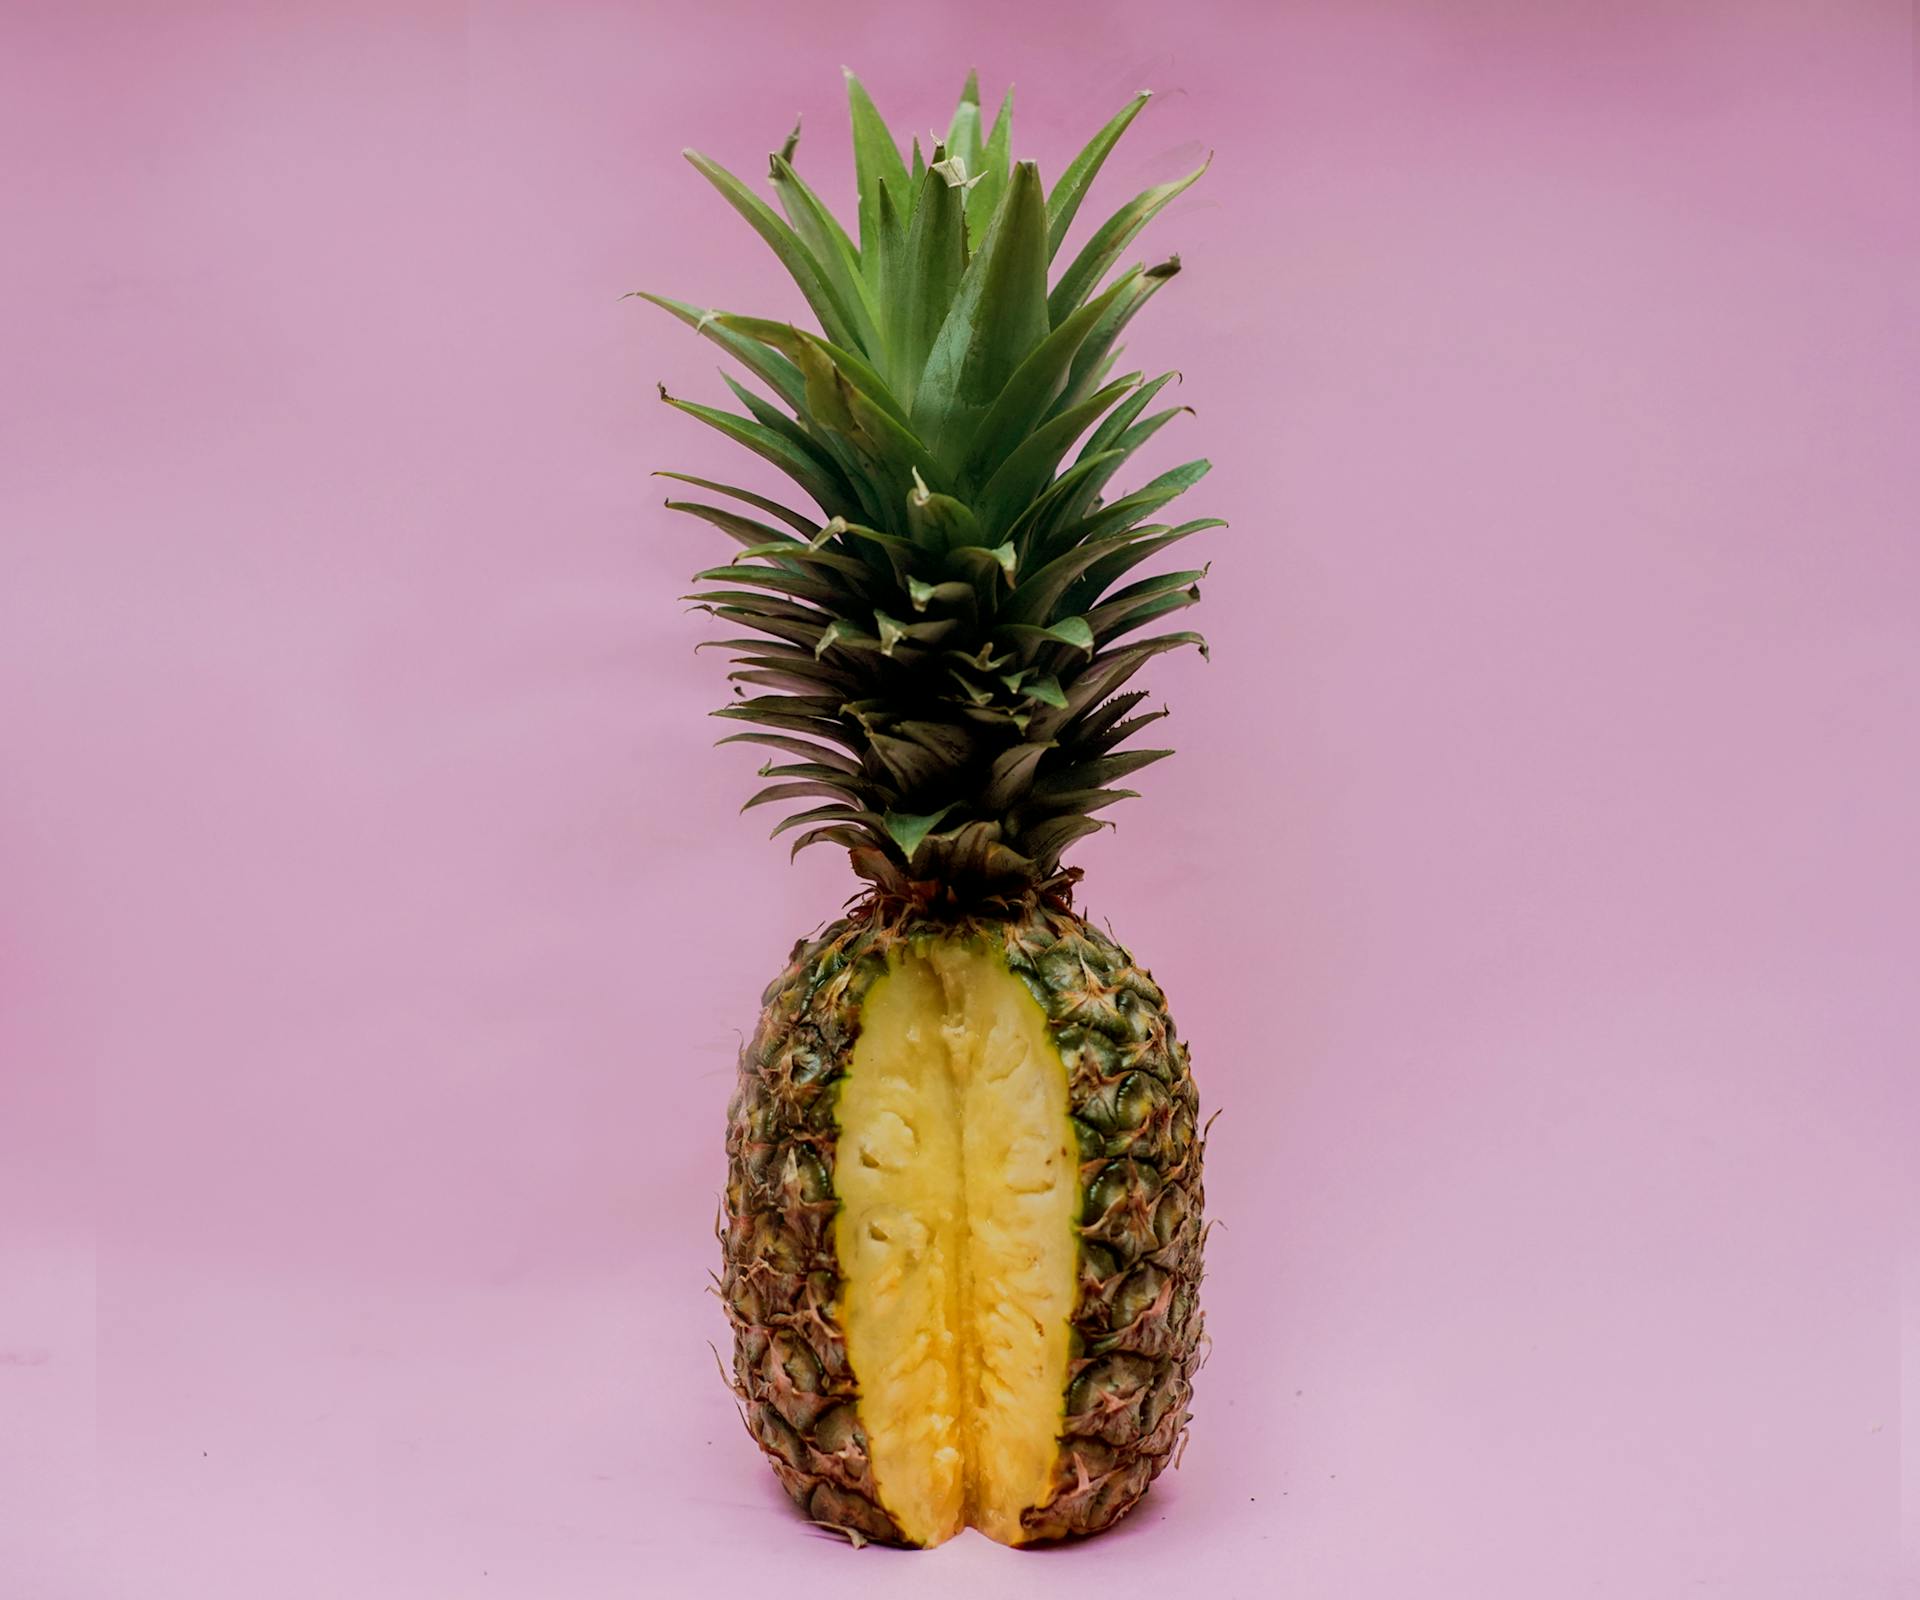 Pineapple Fruit On Pink Surface